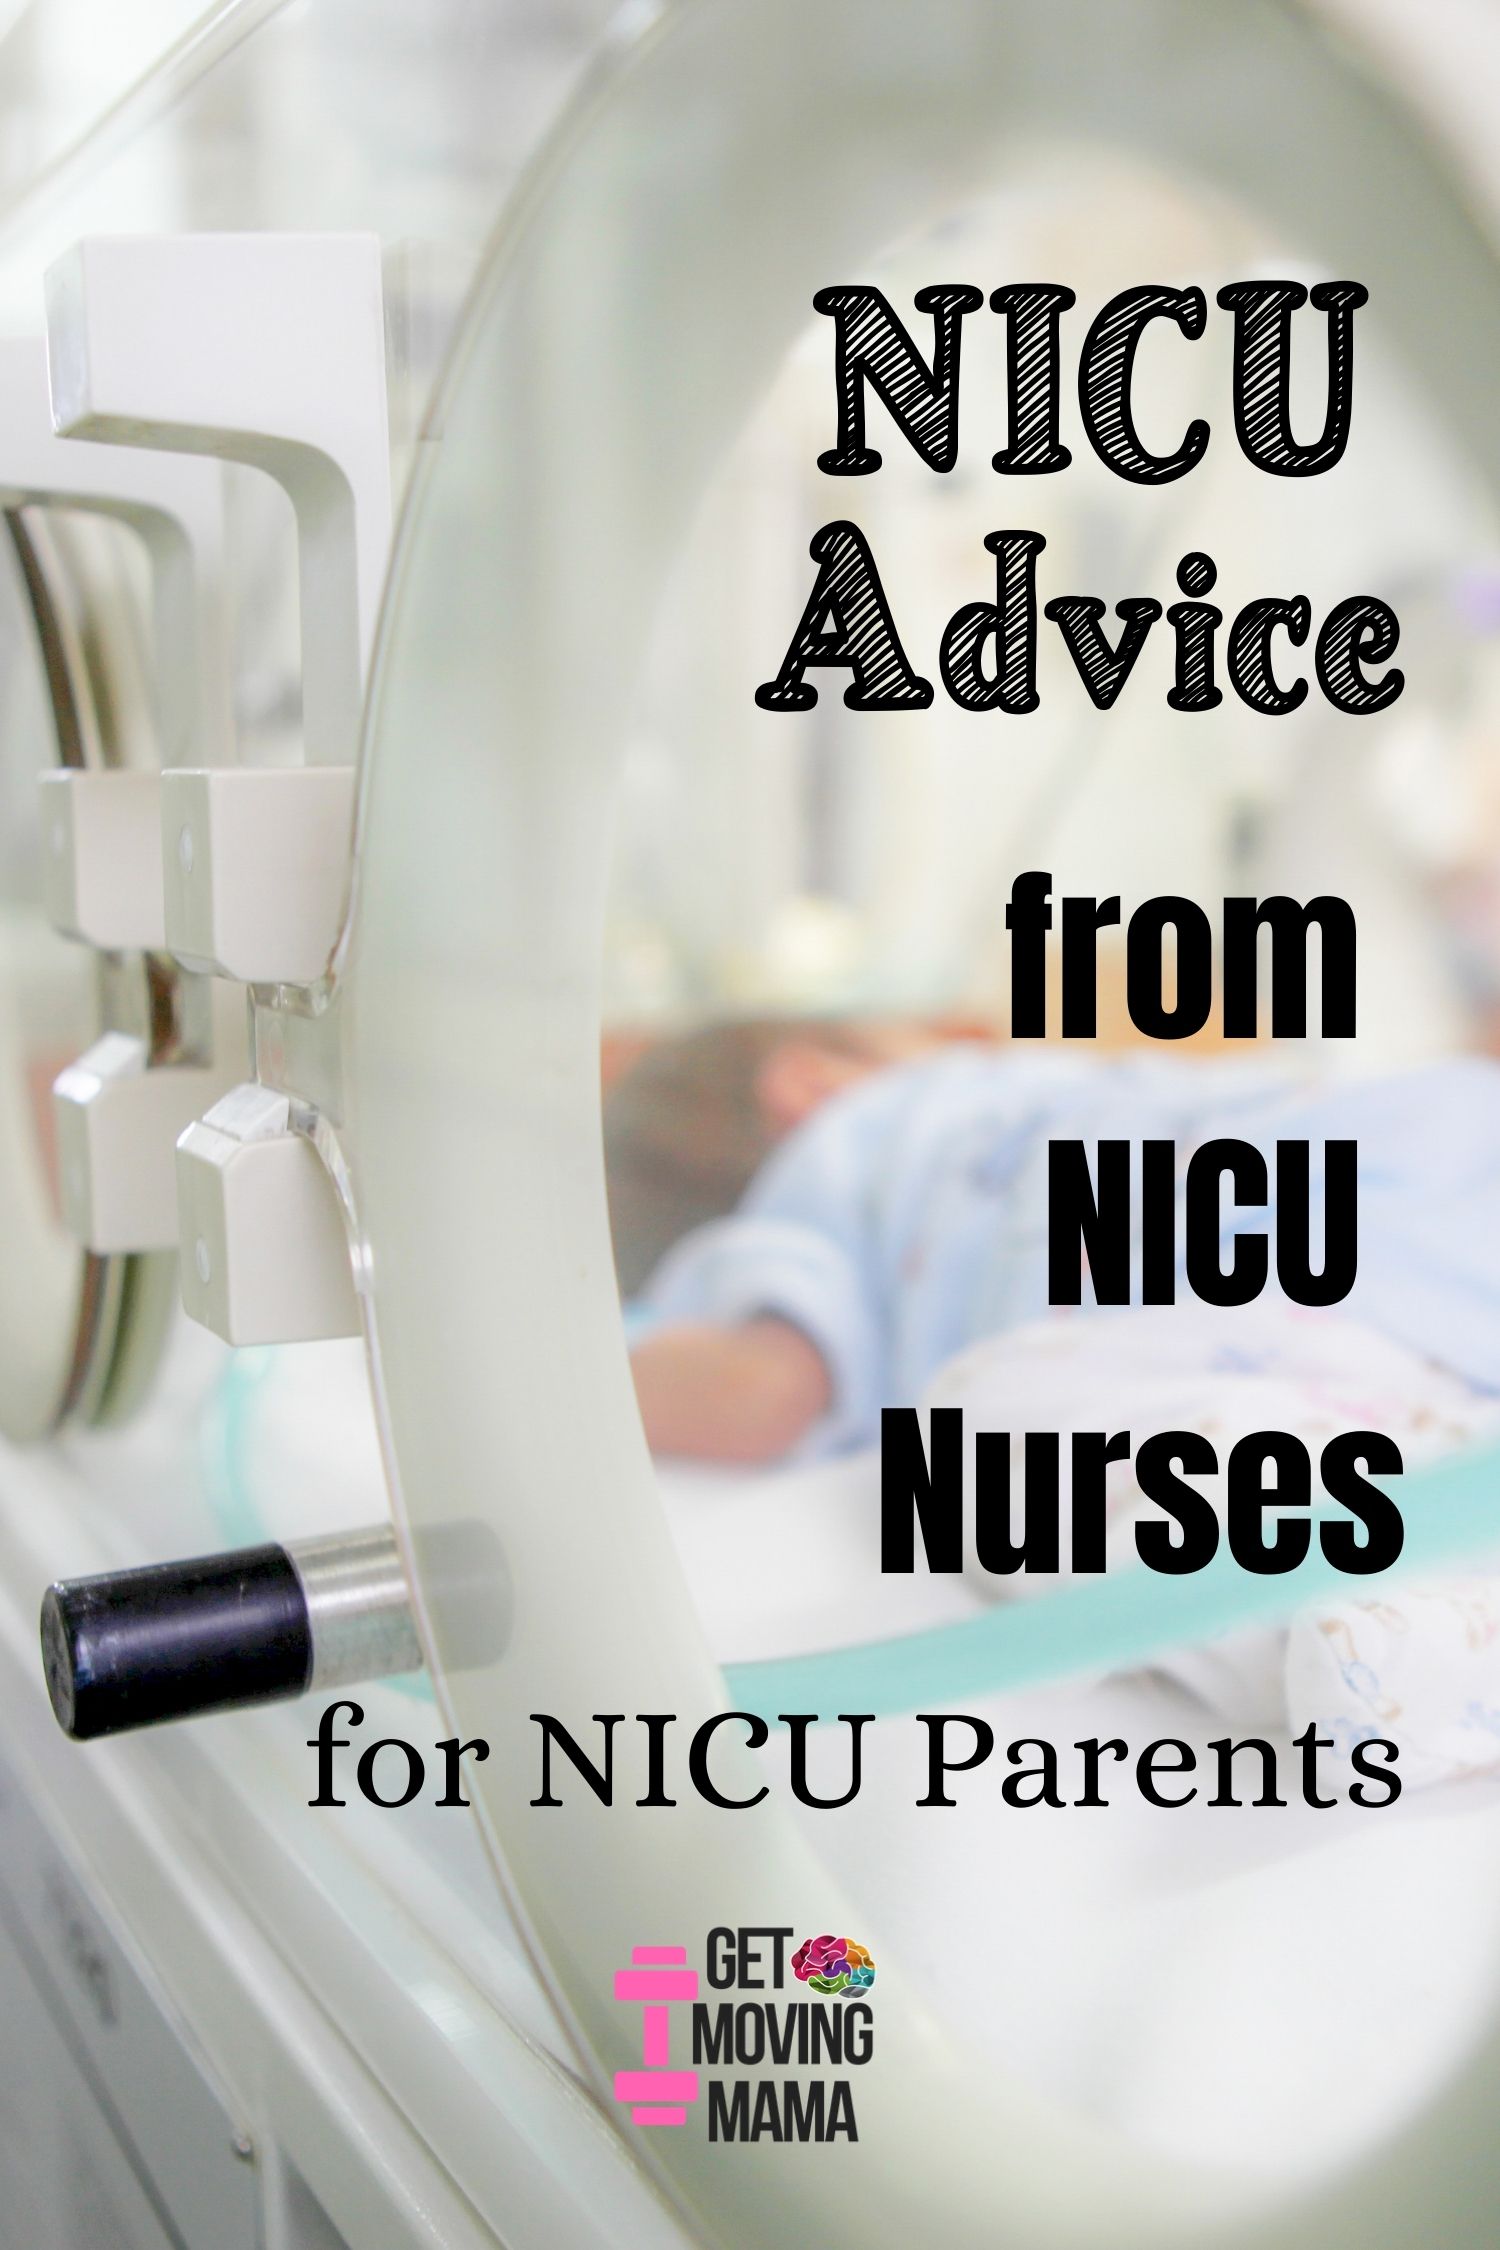 A picture of a premature baby in an incubator with NICU advice from NICU nurses for NICU parents written in black text.